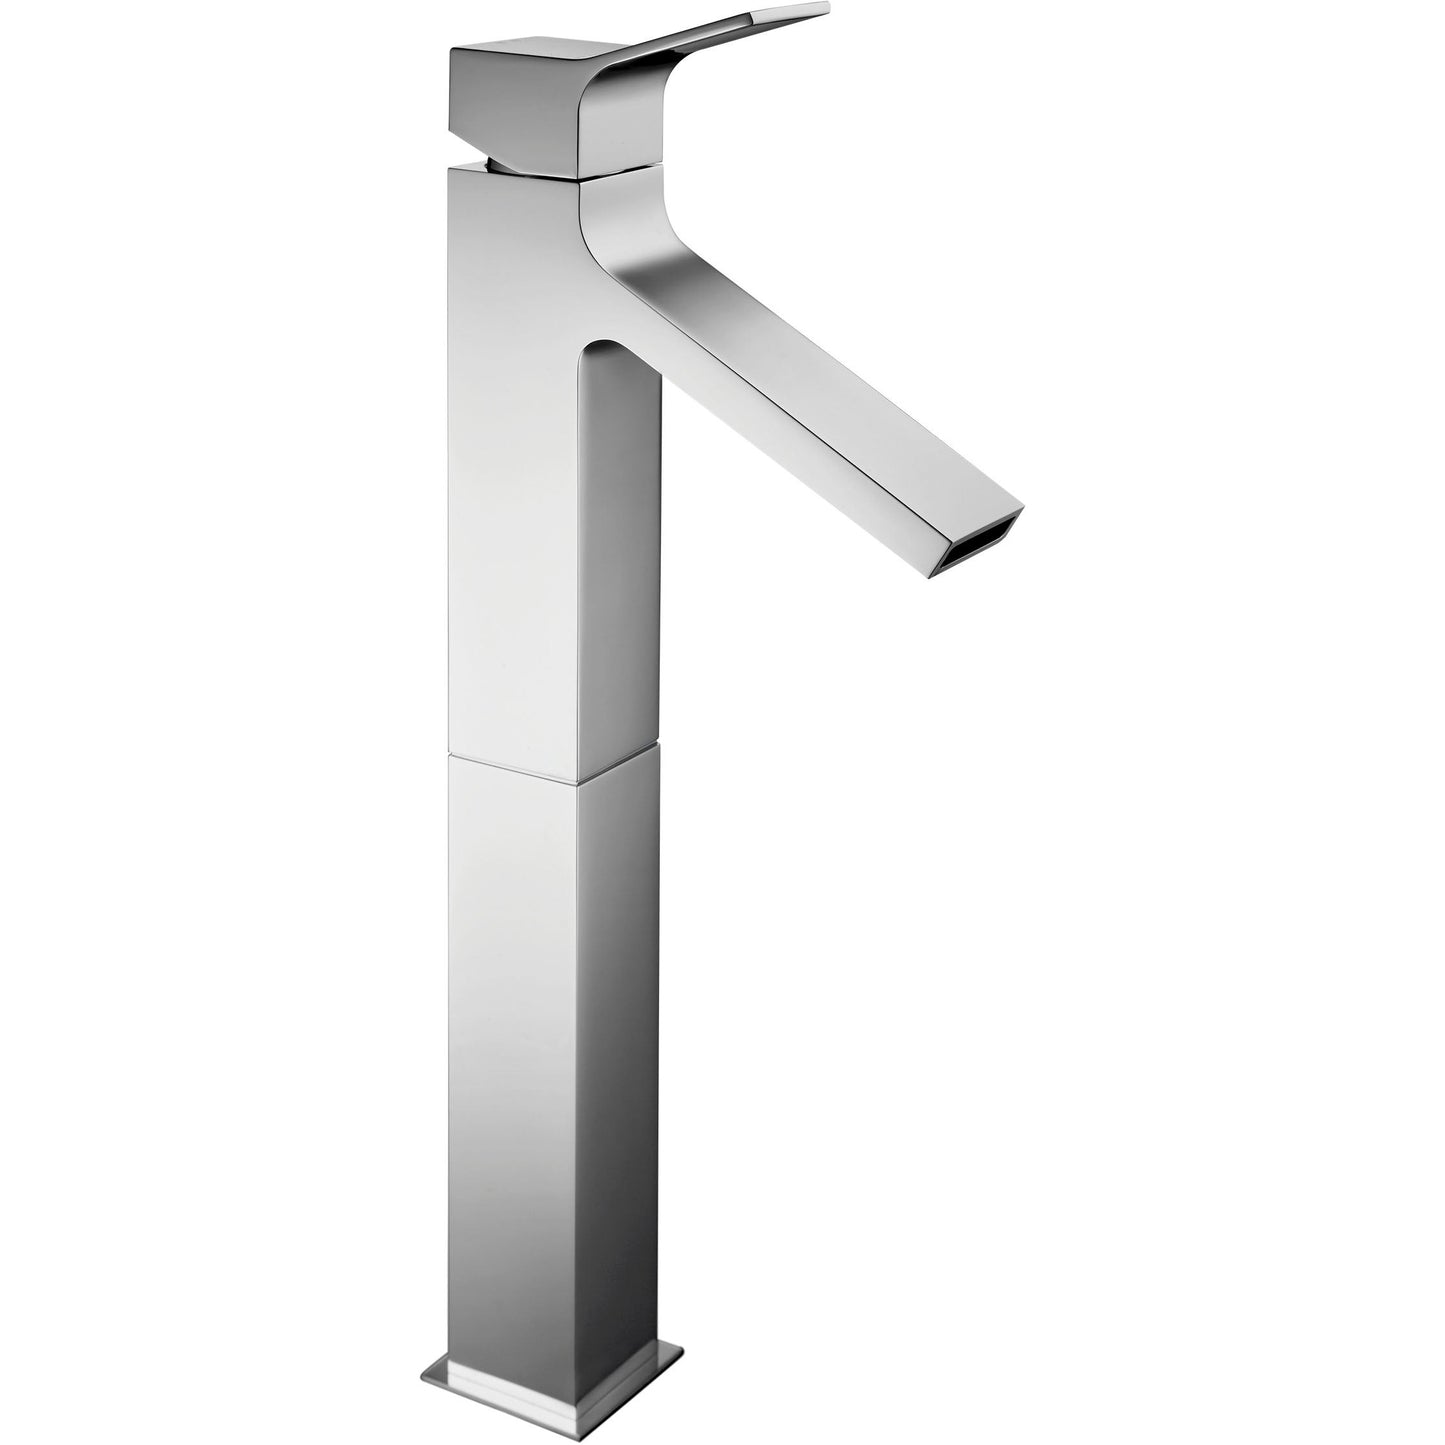 Lavabo faucet Young tall single lever 073018